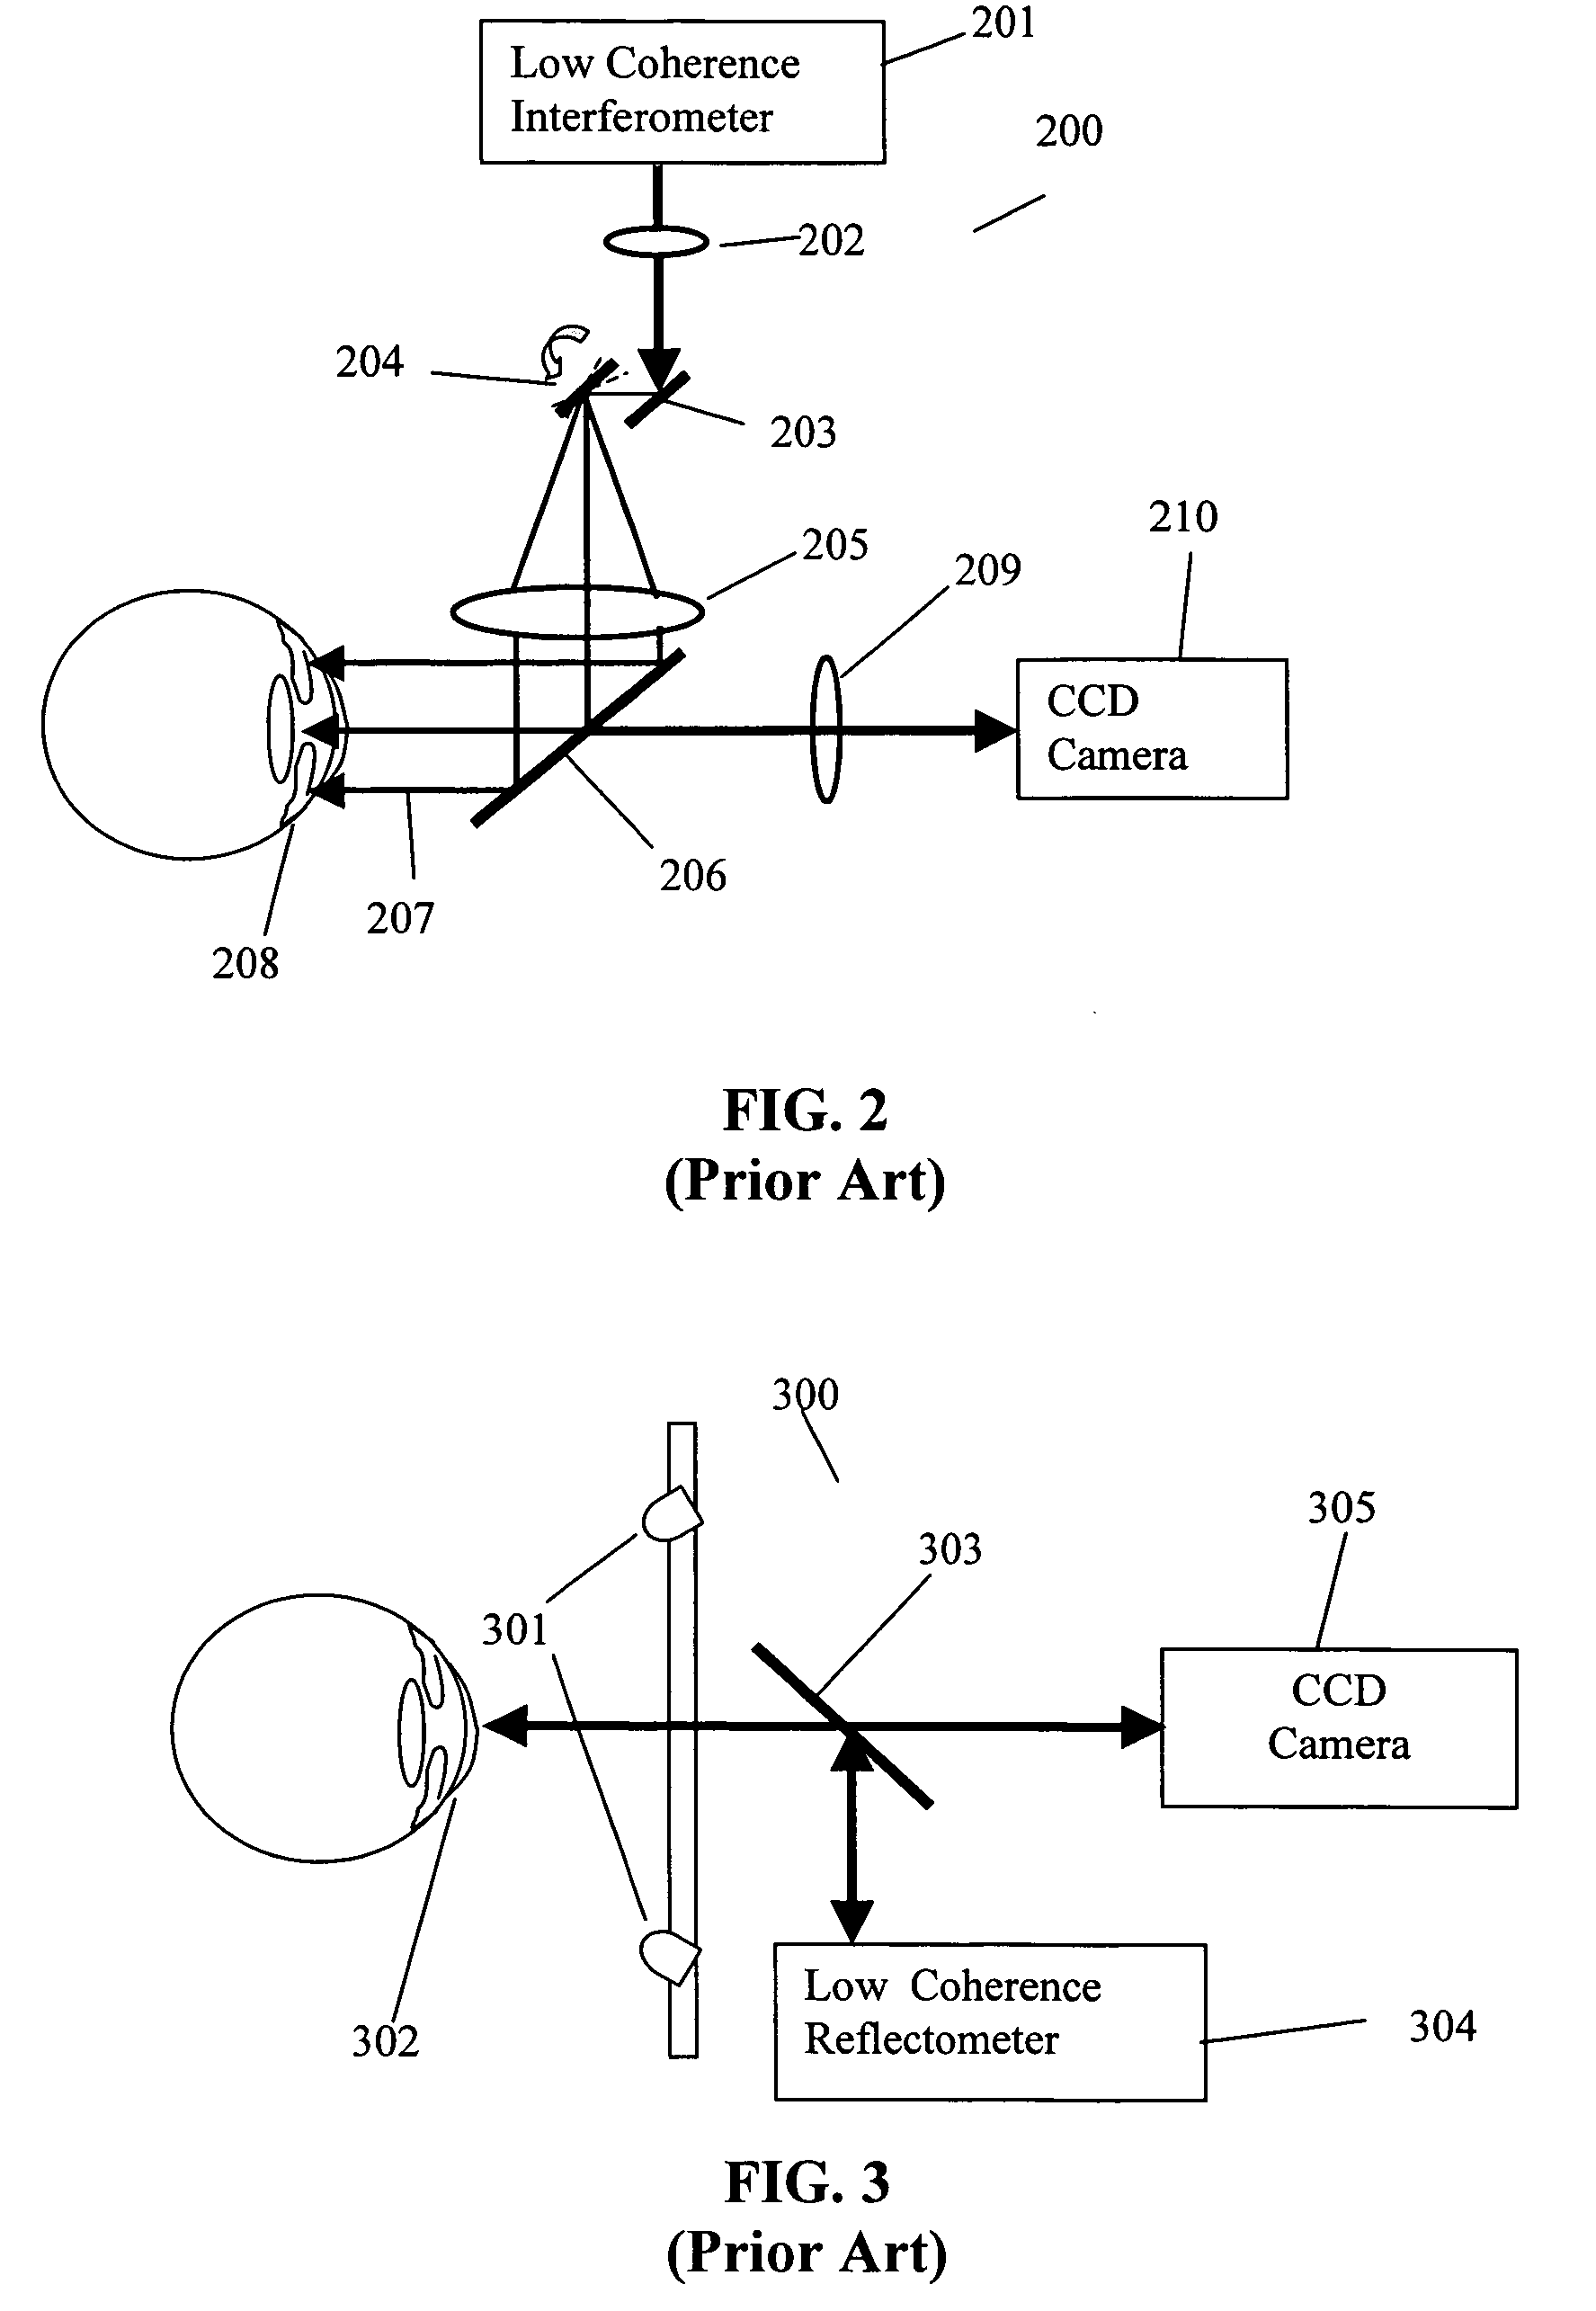 Optical apparatus and methods for performing eye examinations